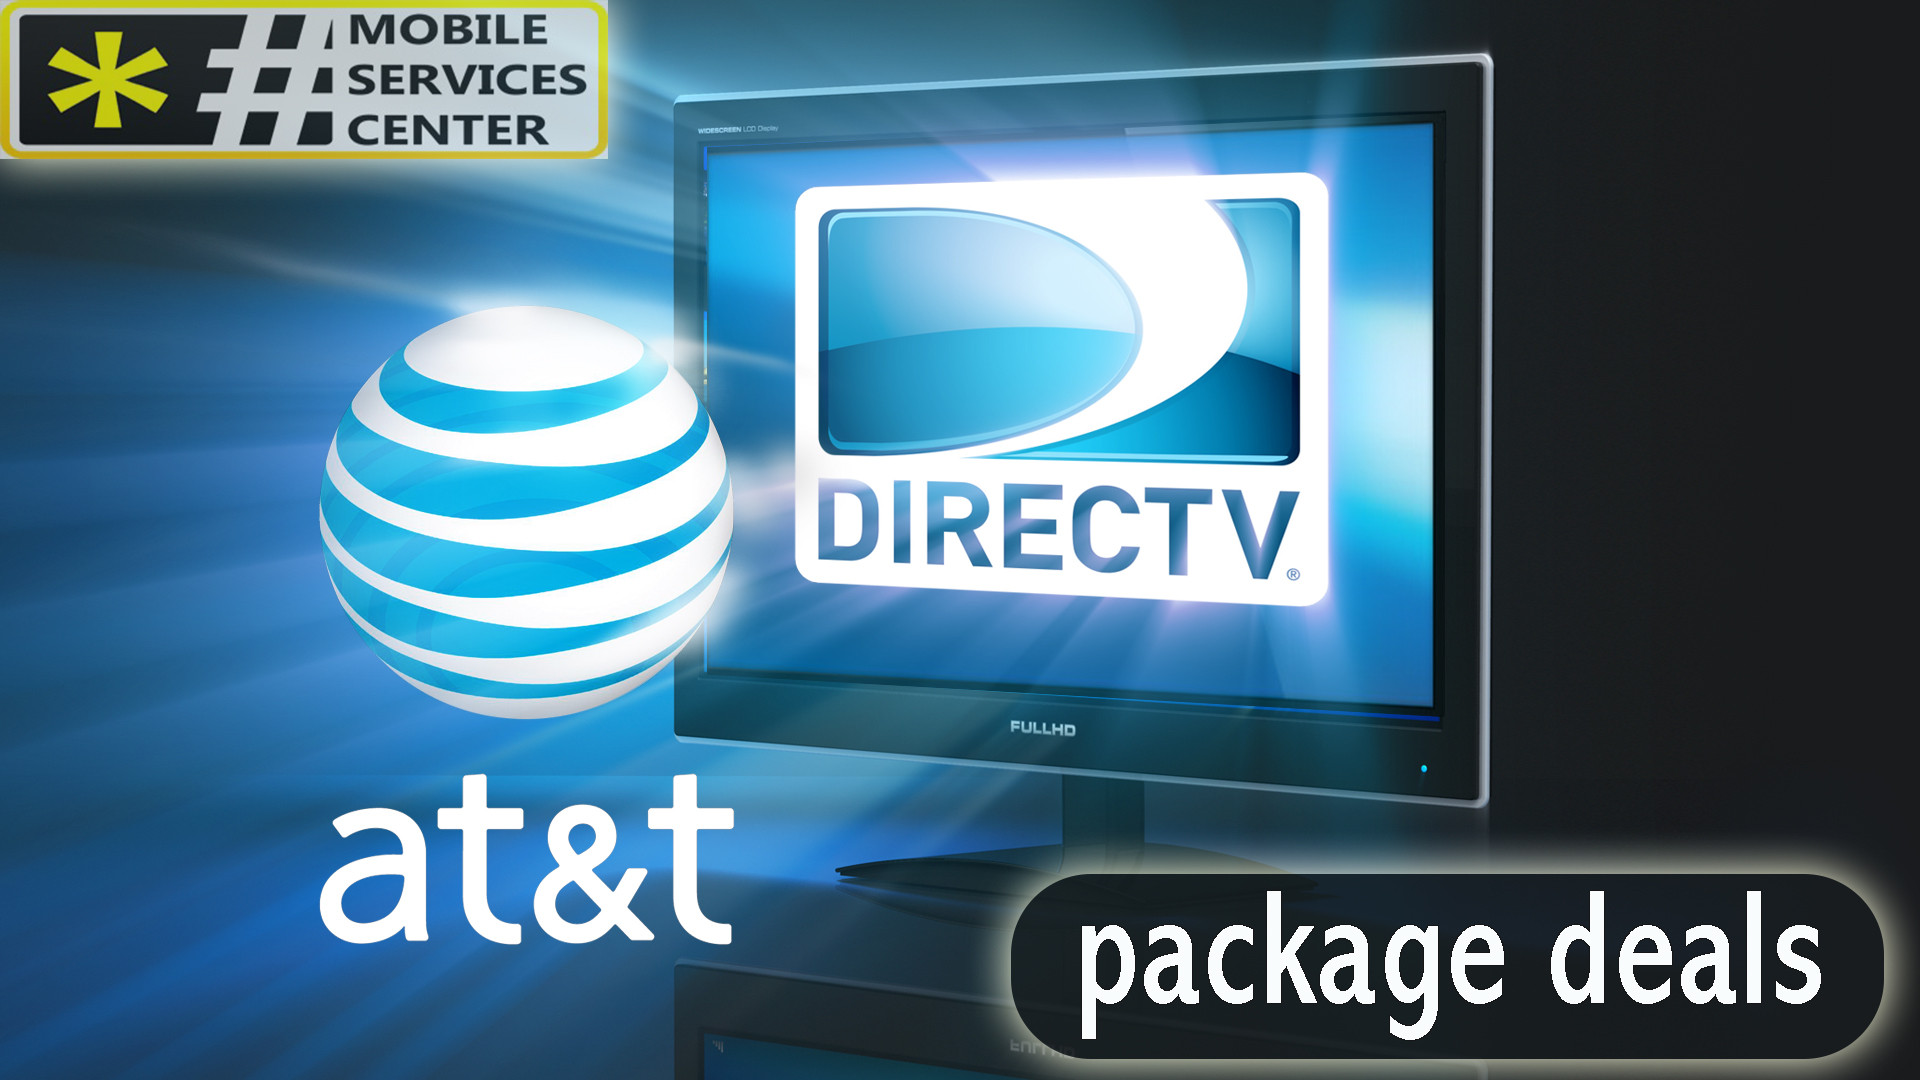 At&t Directv package deals